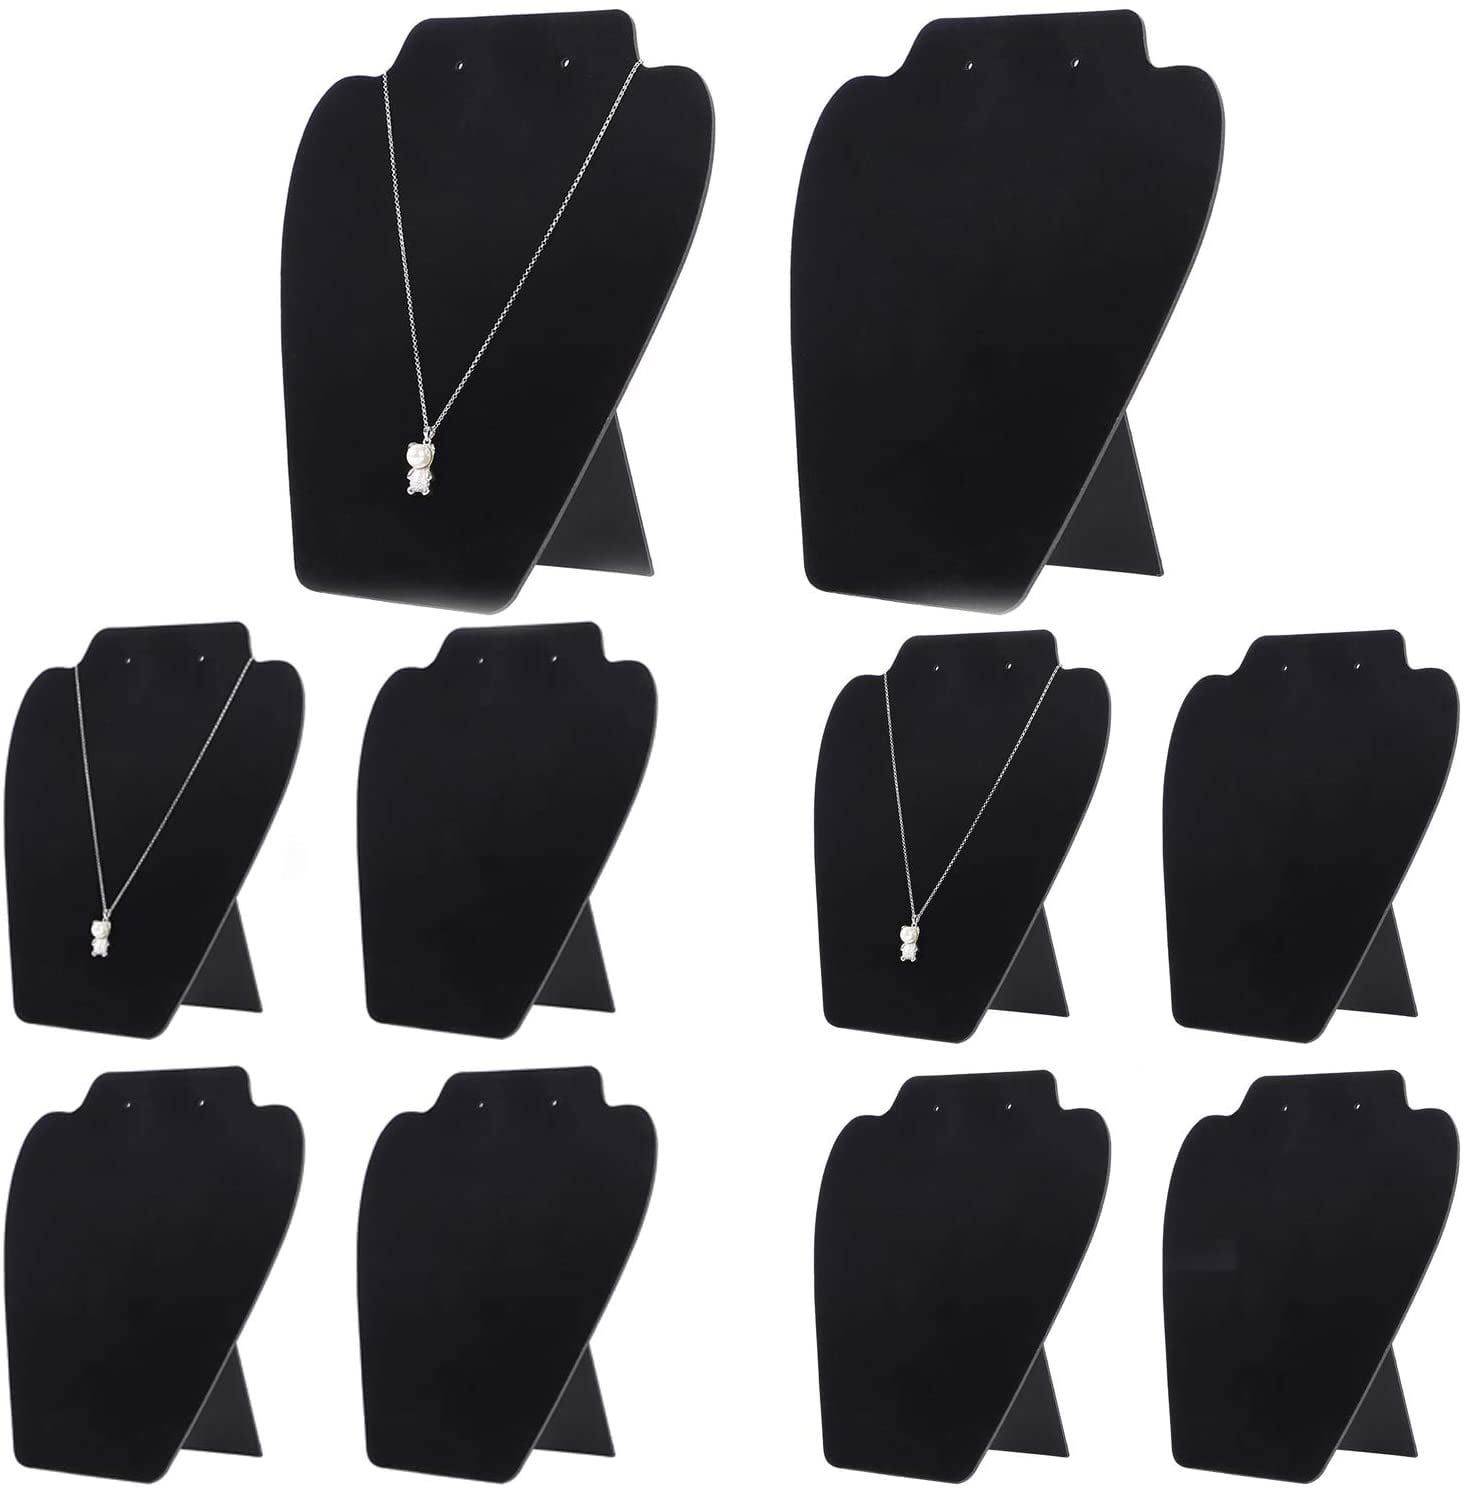 Justsoso 8pcs/set Face Velvet Black Foldable Necklace Display for Selling,  Portable Jewelry Easel Display Stand Rack, Bust Stand Holder For Shop Show